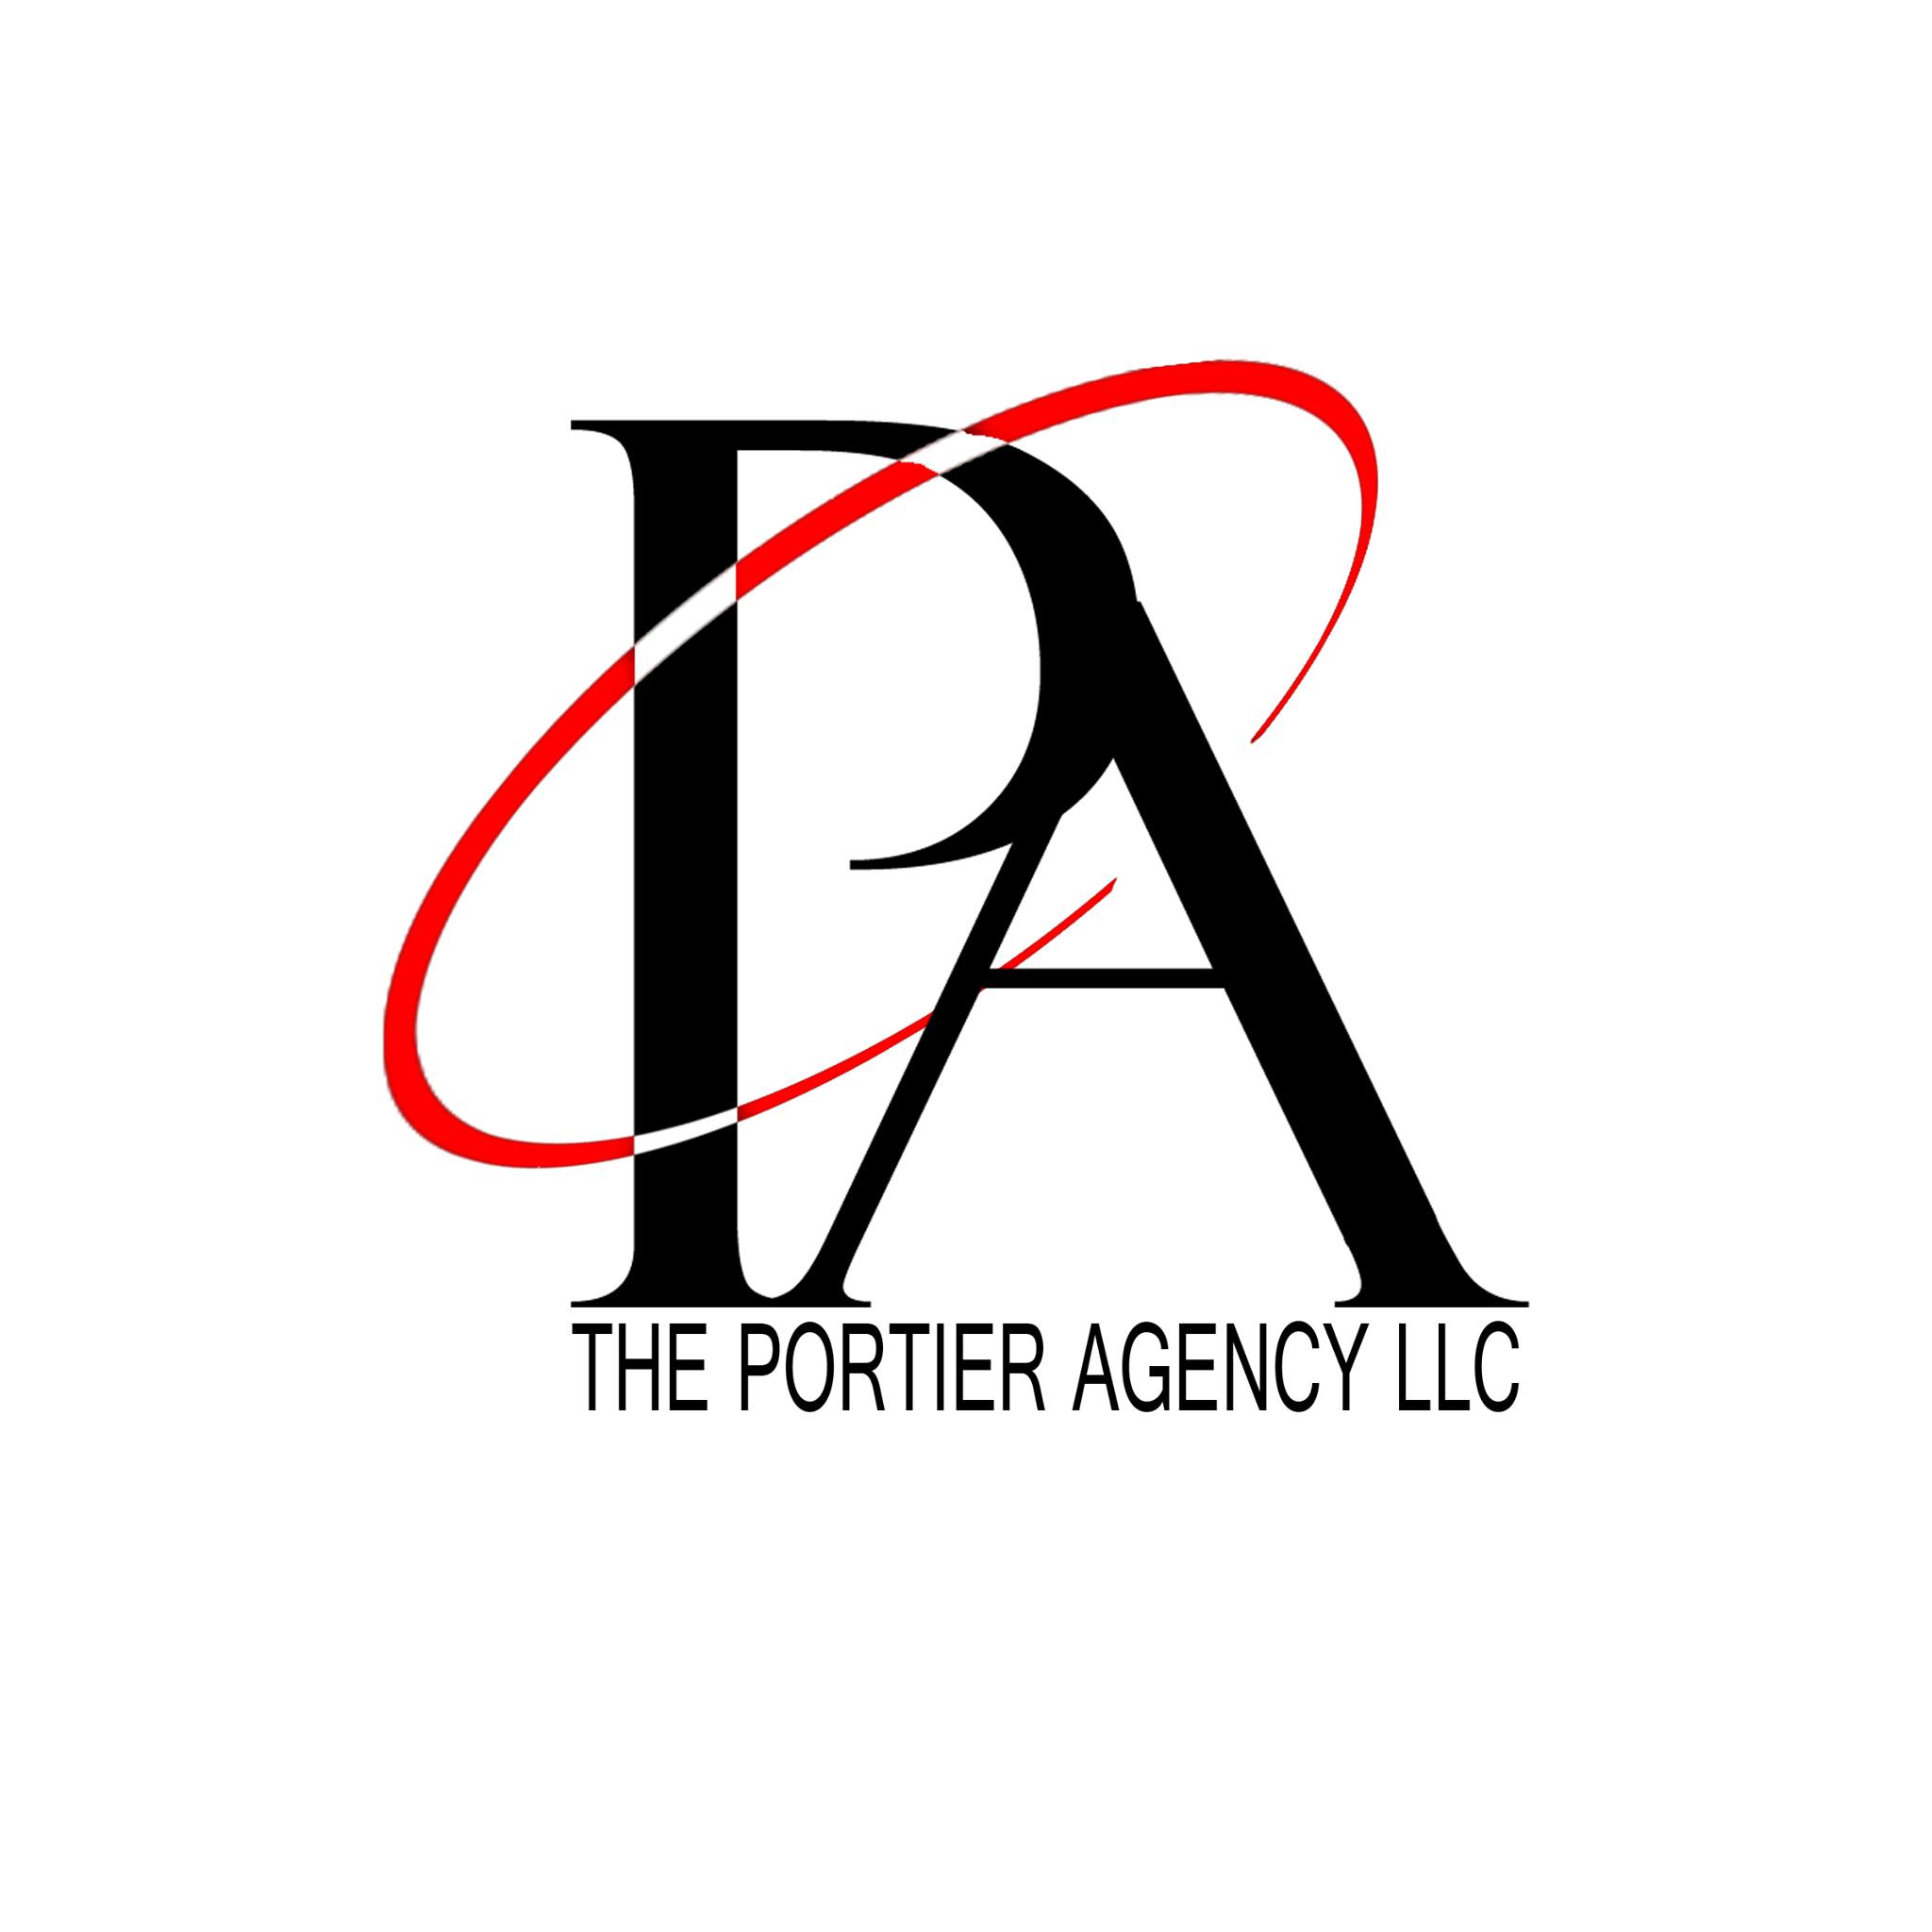 The Portier Agency